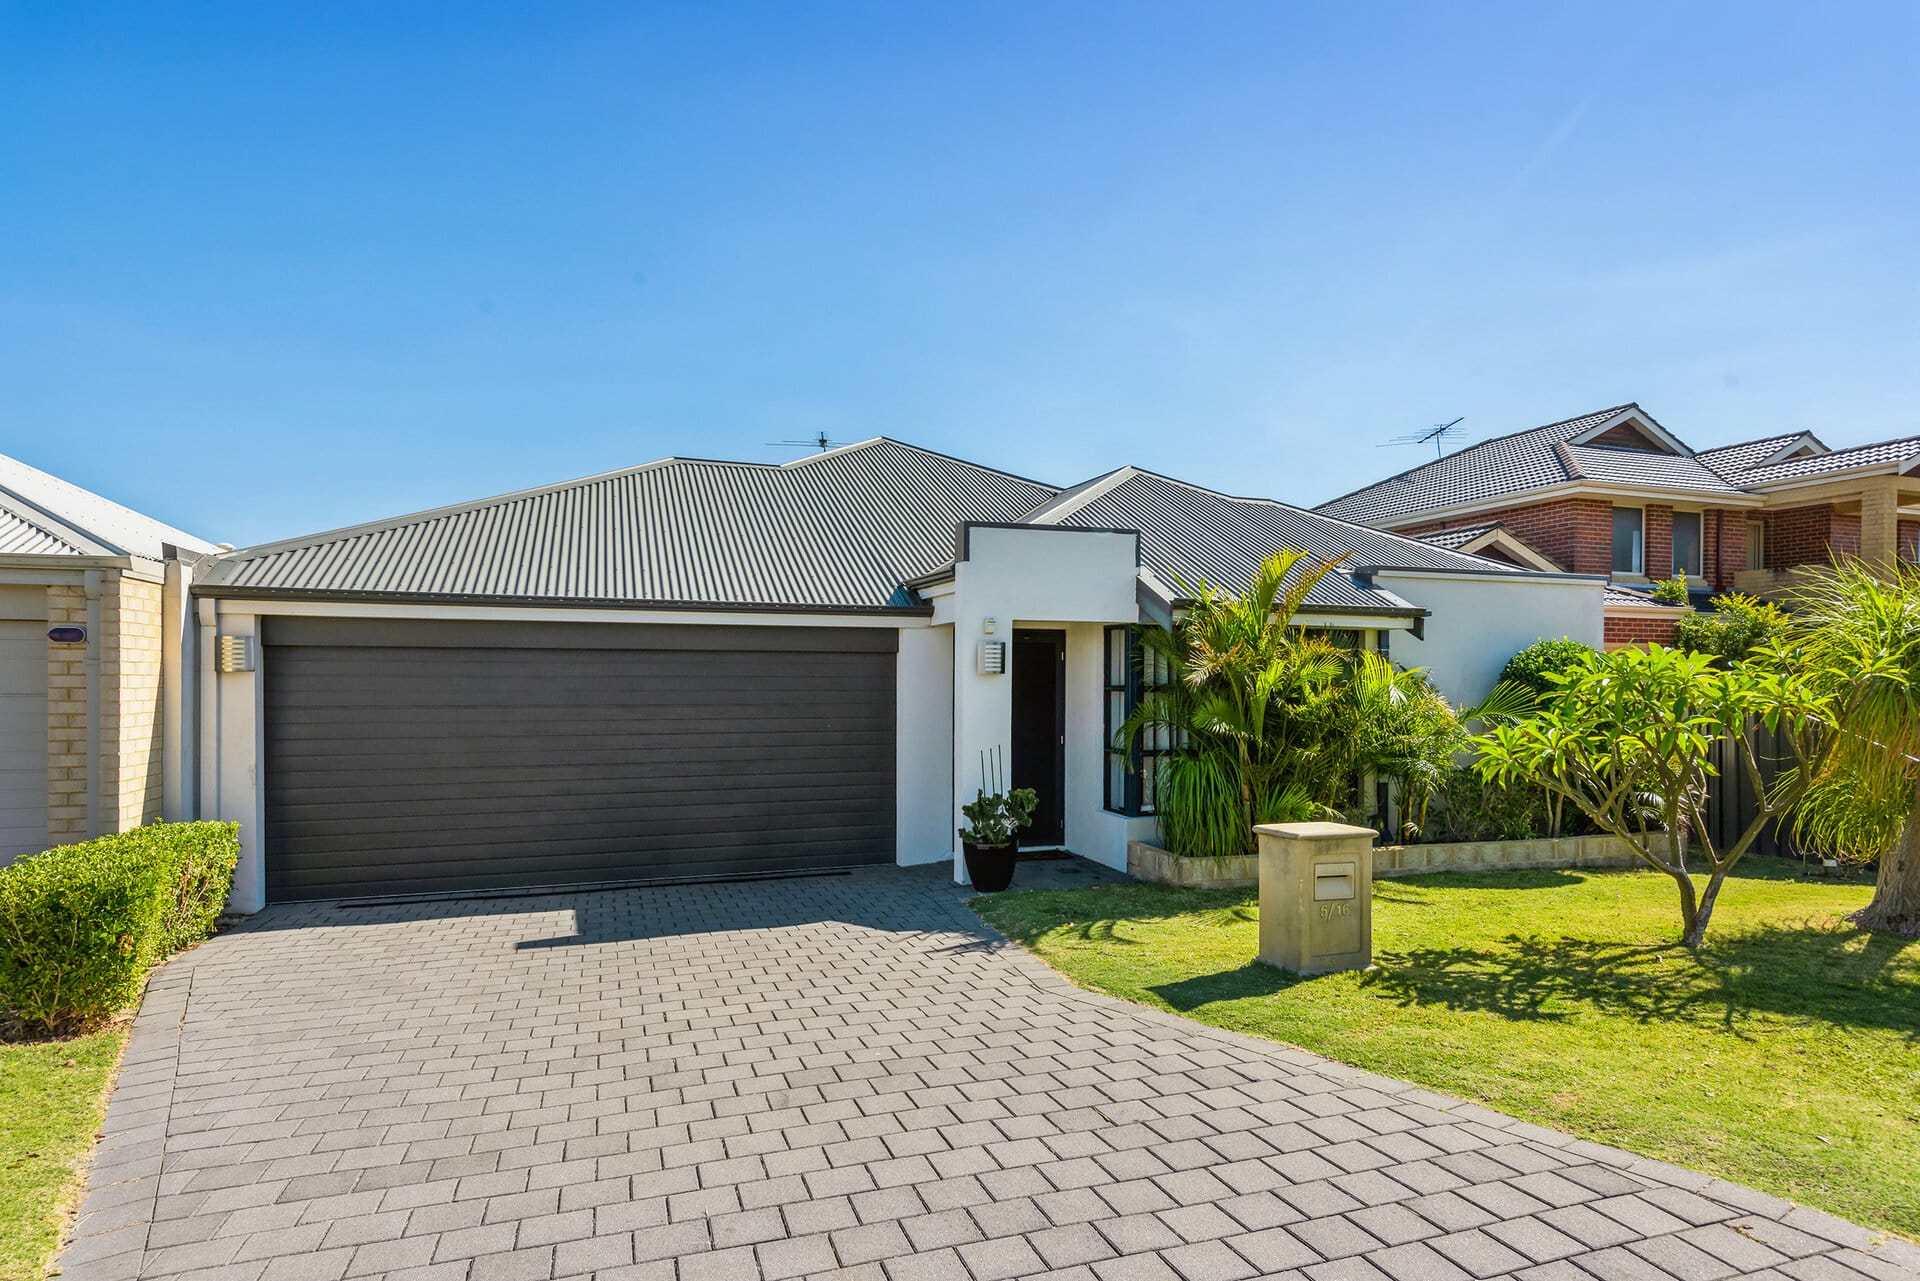 All you need to know about Private Rentals in Perth